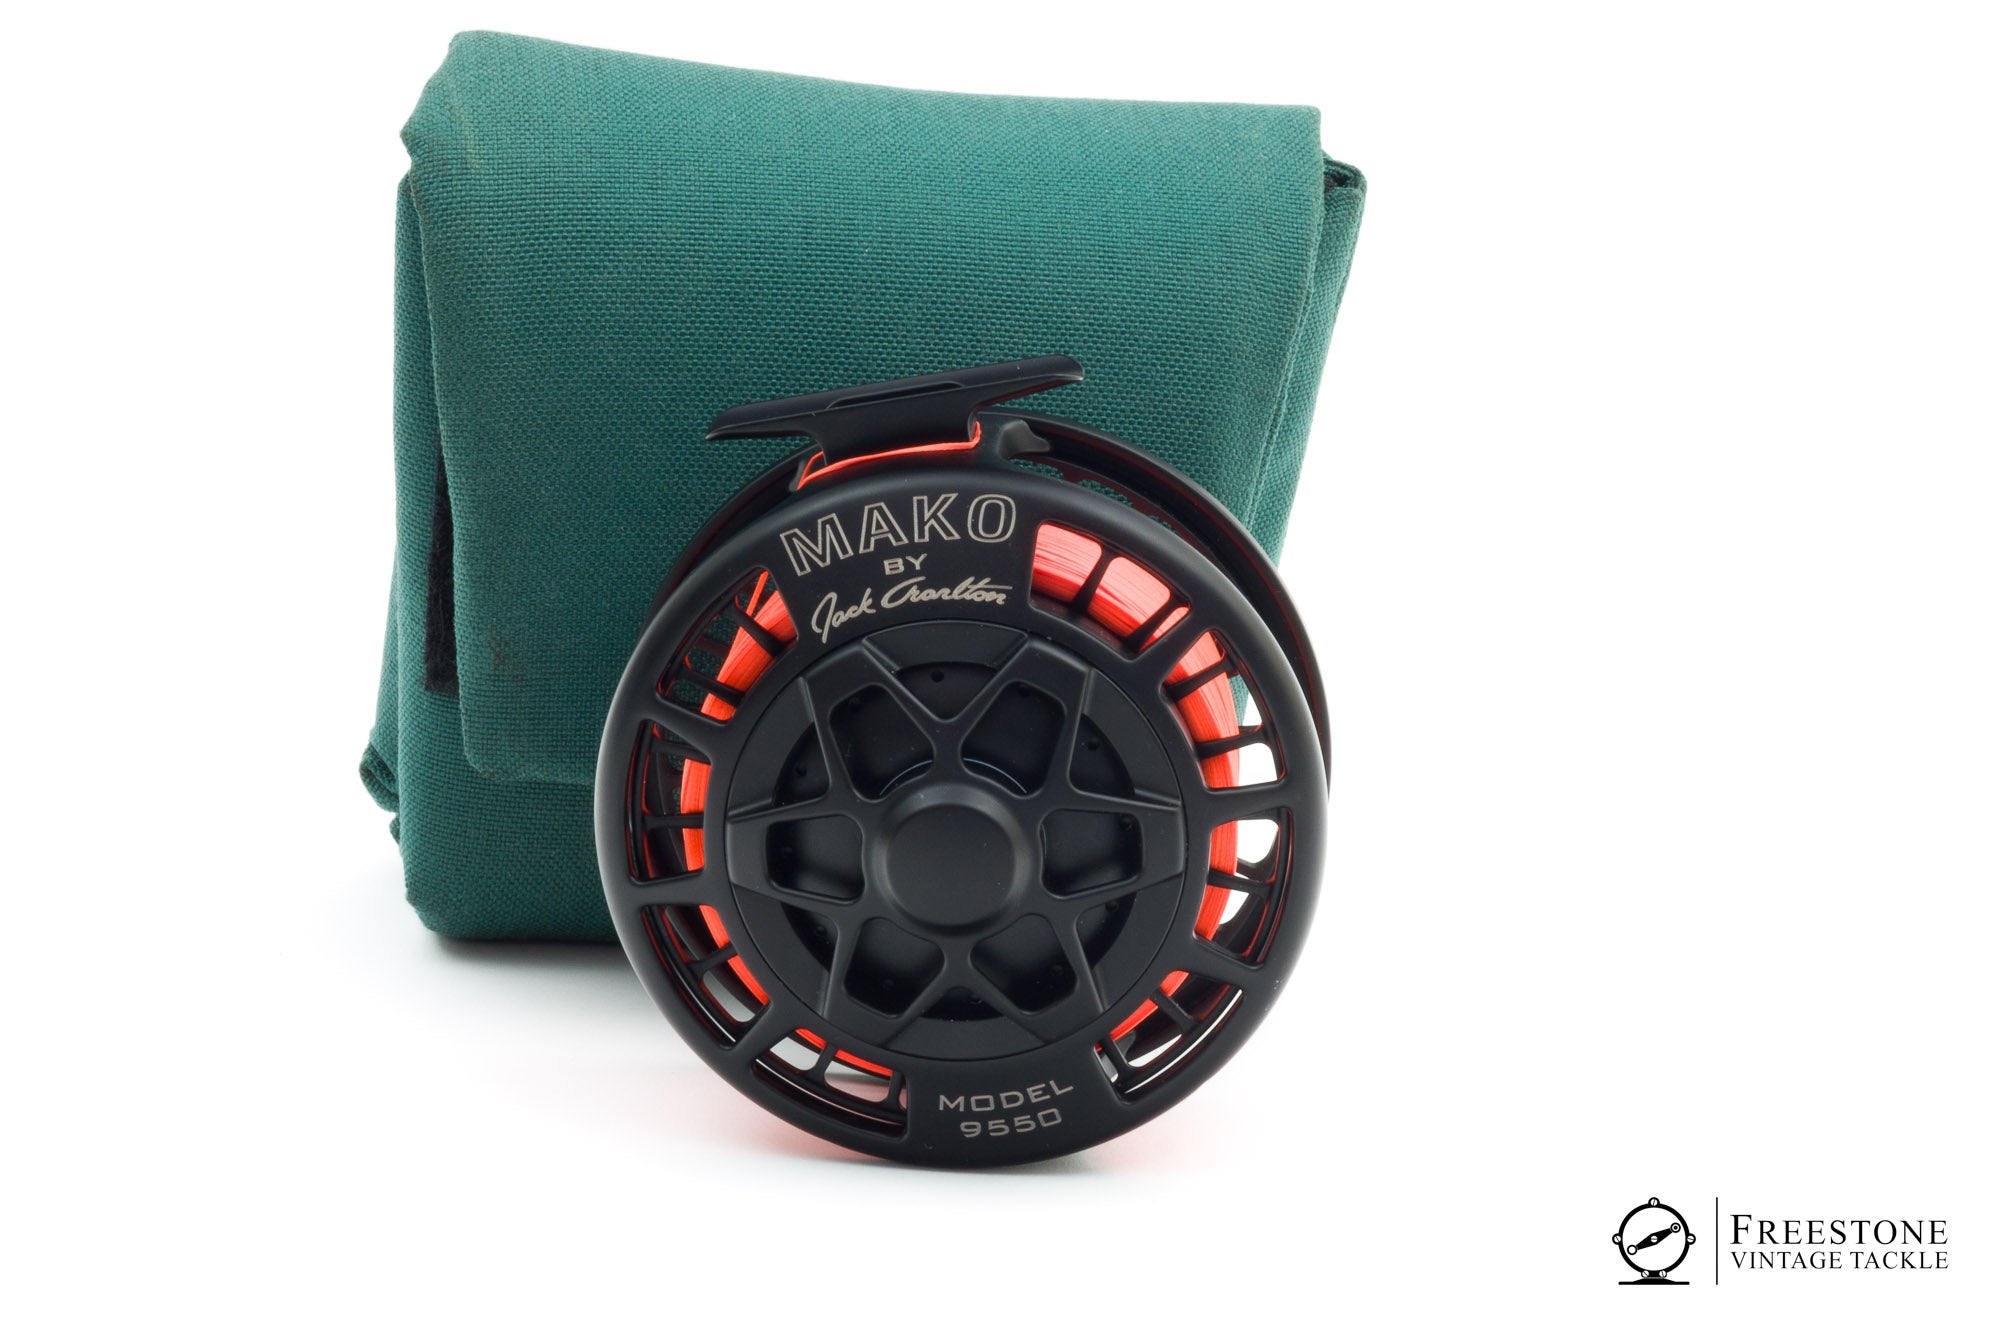 For sale here is a Charlton Mako 9600B fly reel with additional